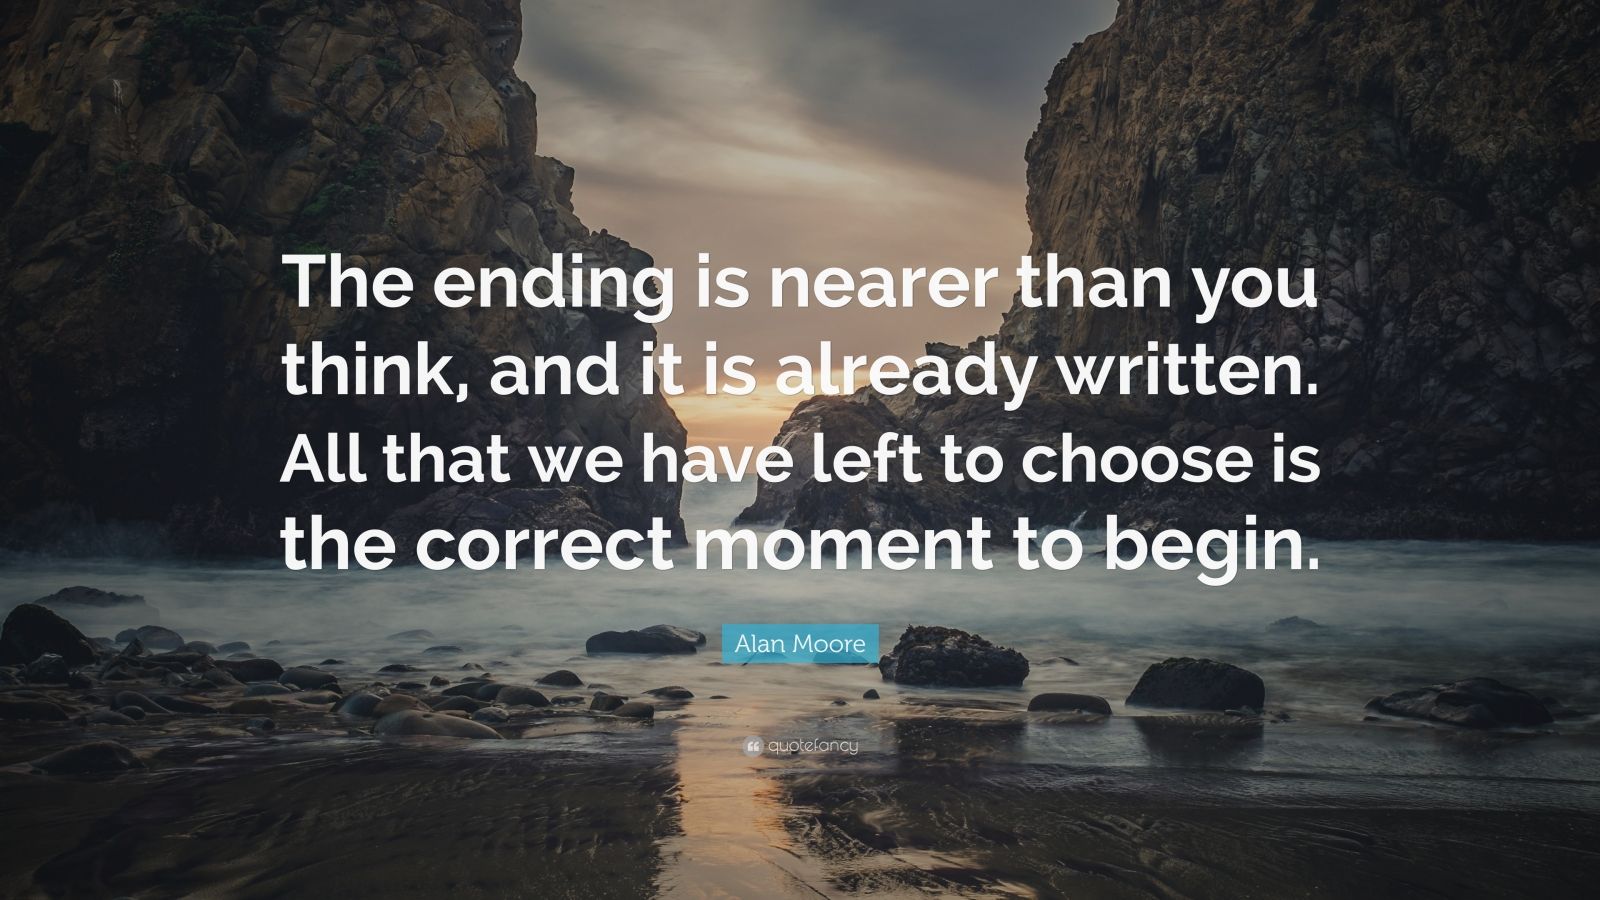 Alan Moore Quote: “The ending is nearer than you think, and it is ...